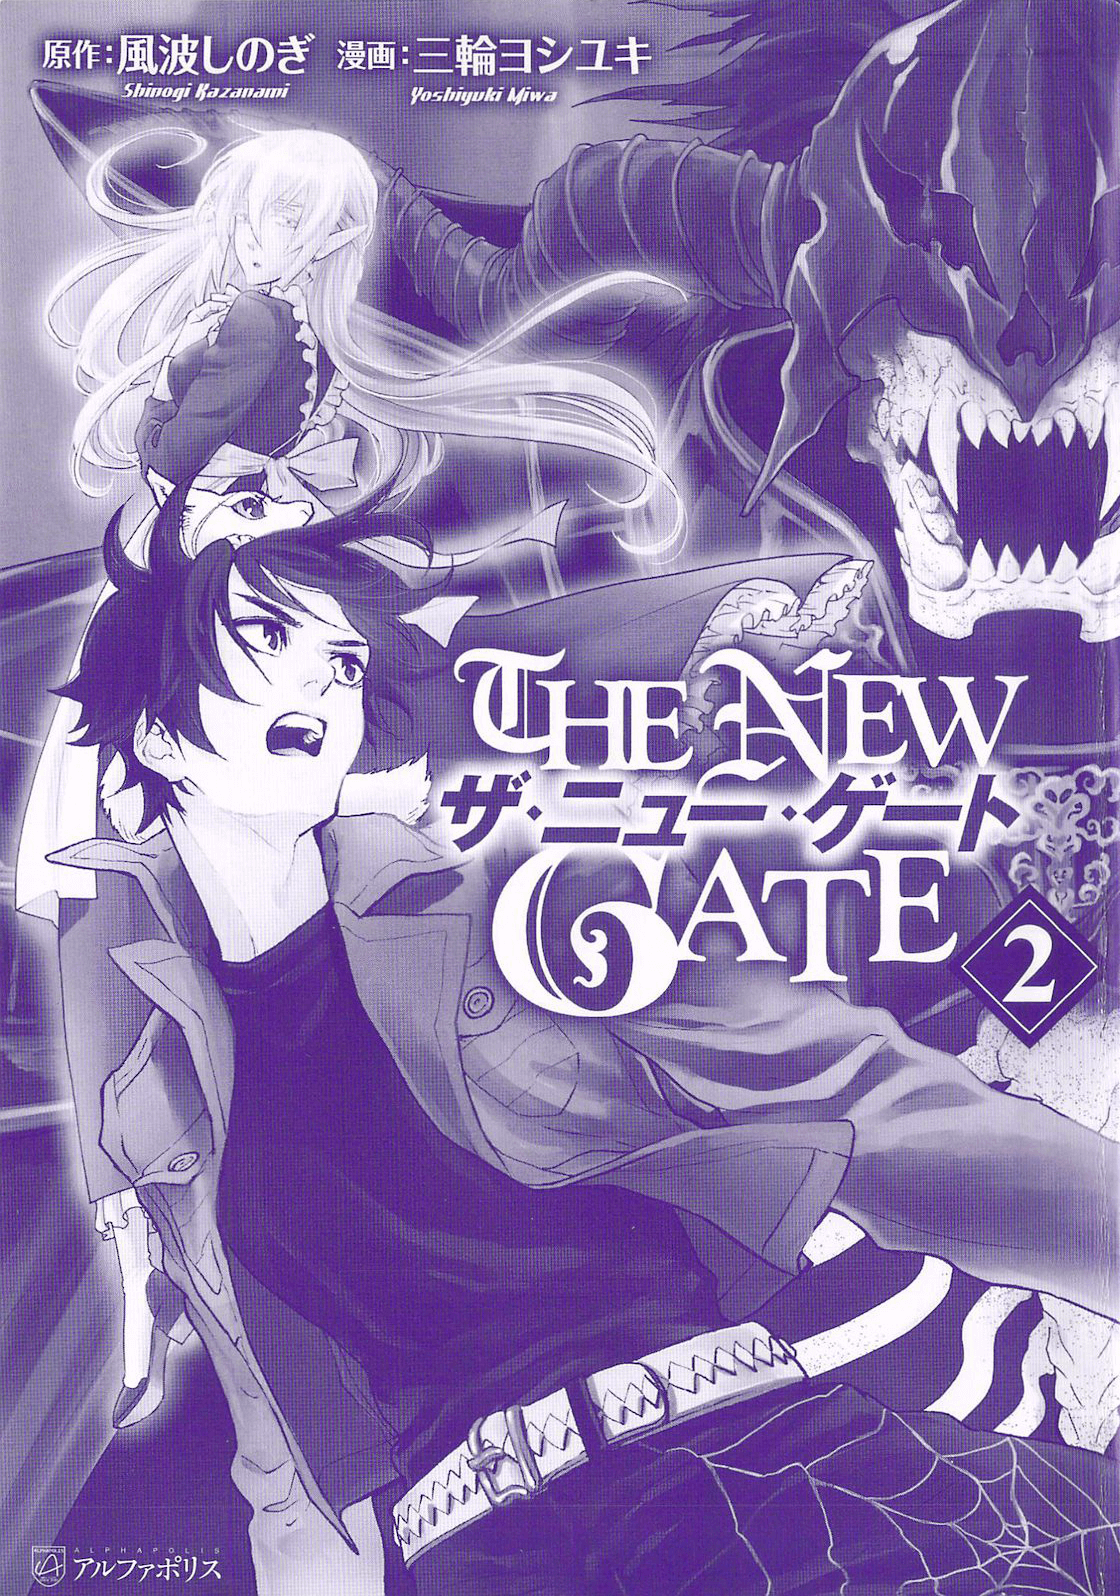 The New Gate Volume 3 (The New Gate Series)